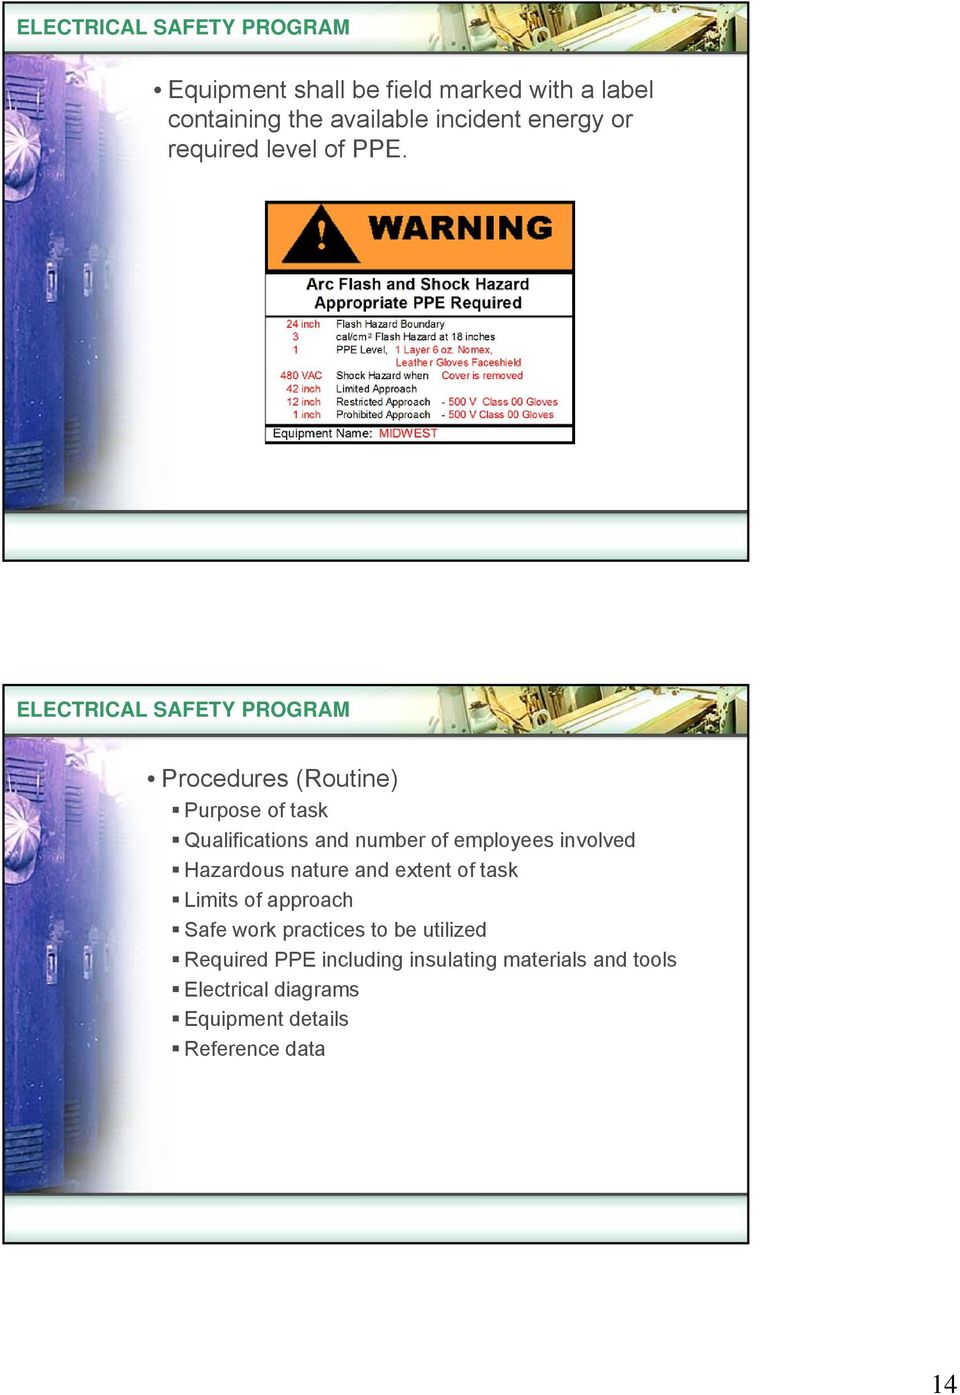 ELECTRICAL SAFETY PROGRAM Procedures (Routine) Purpose of task Qualifications and number of employees involved